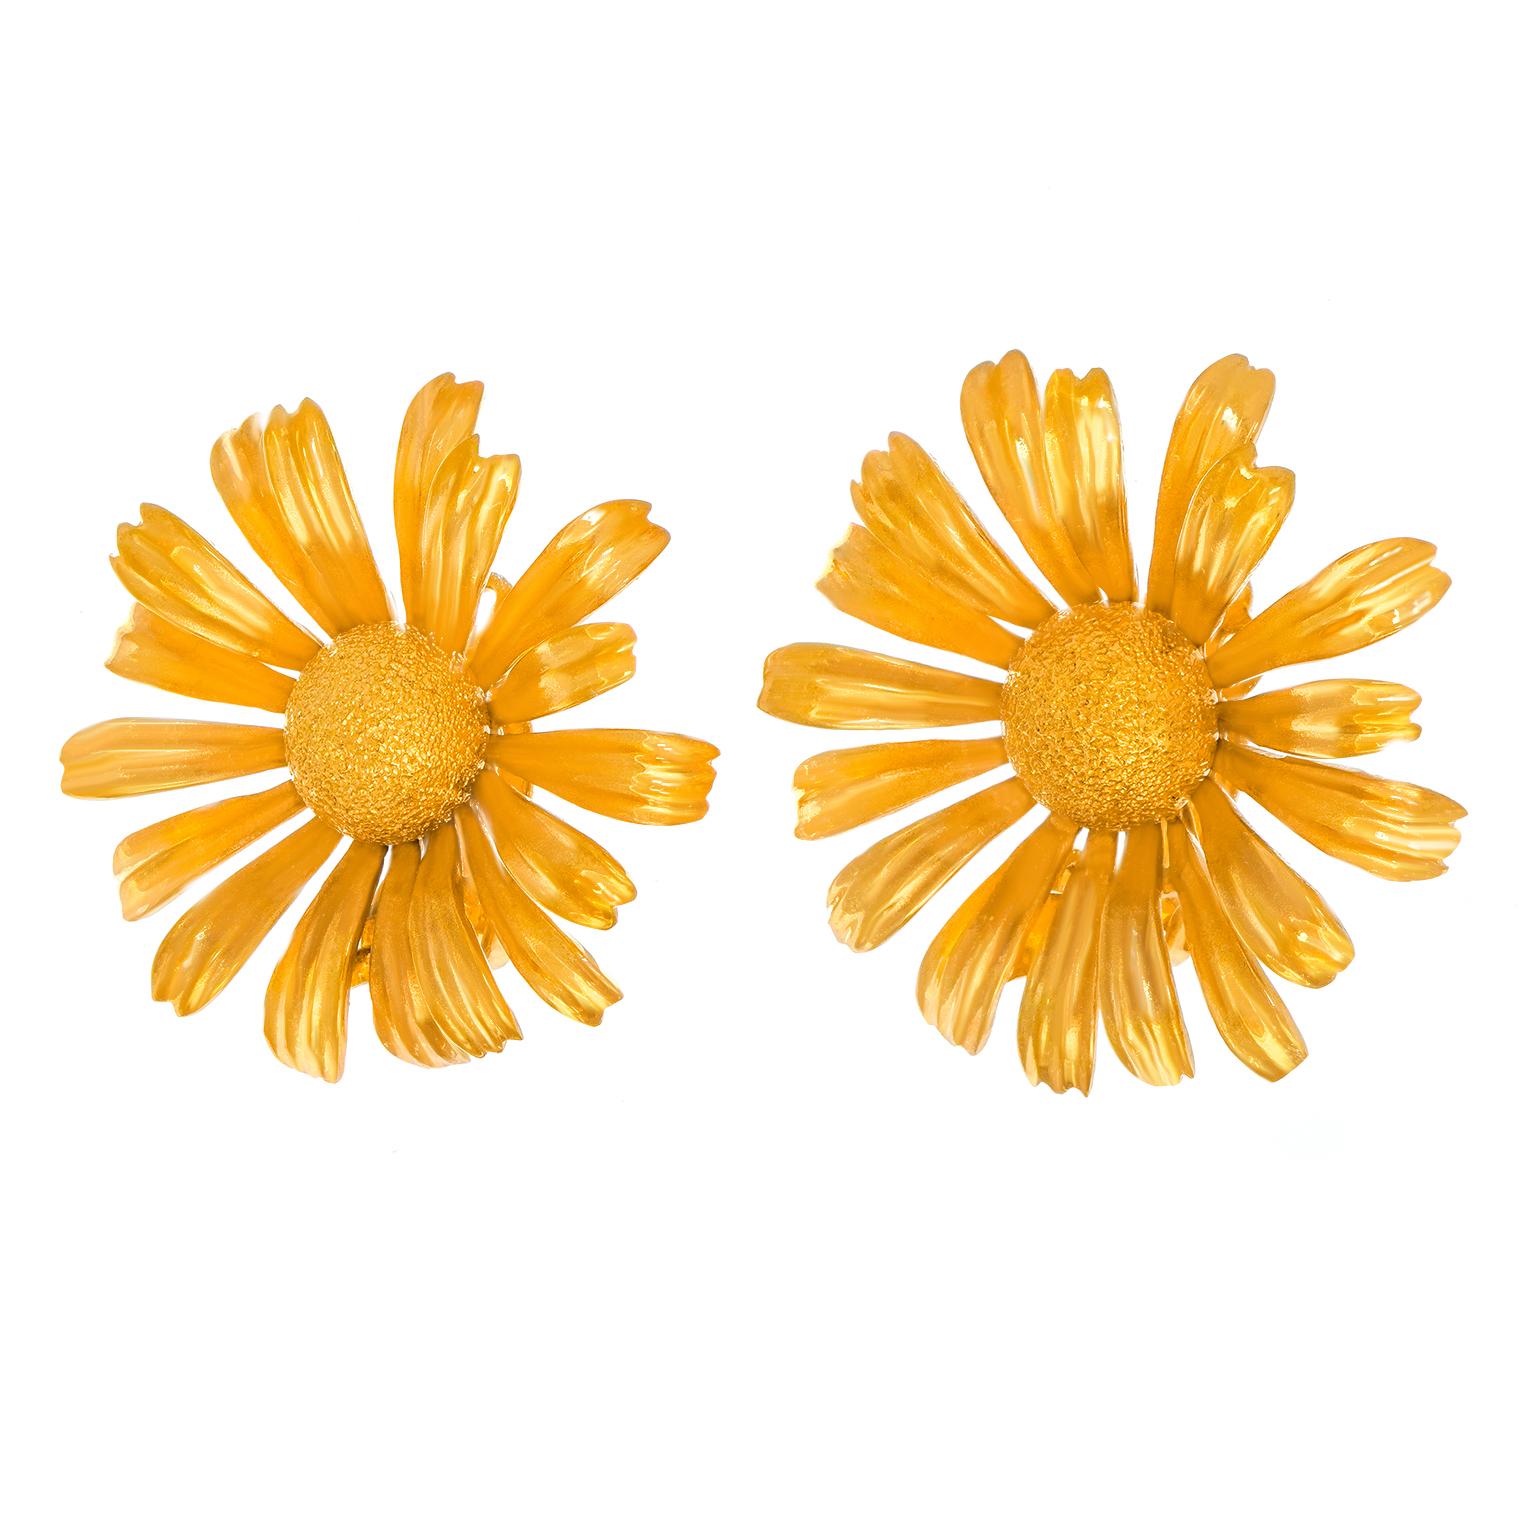 Flower Power Sixties Earrings In Excellent Condition For Sale In Litchfield, CT